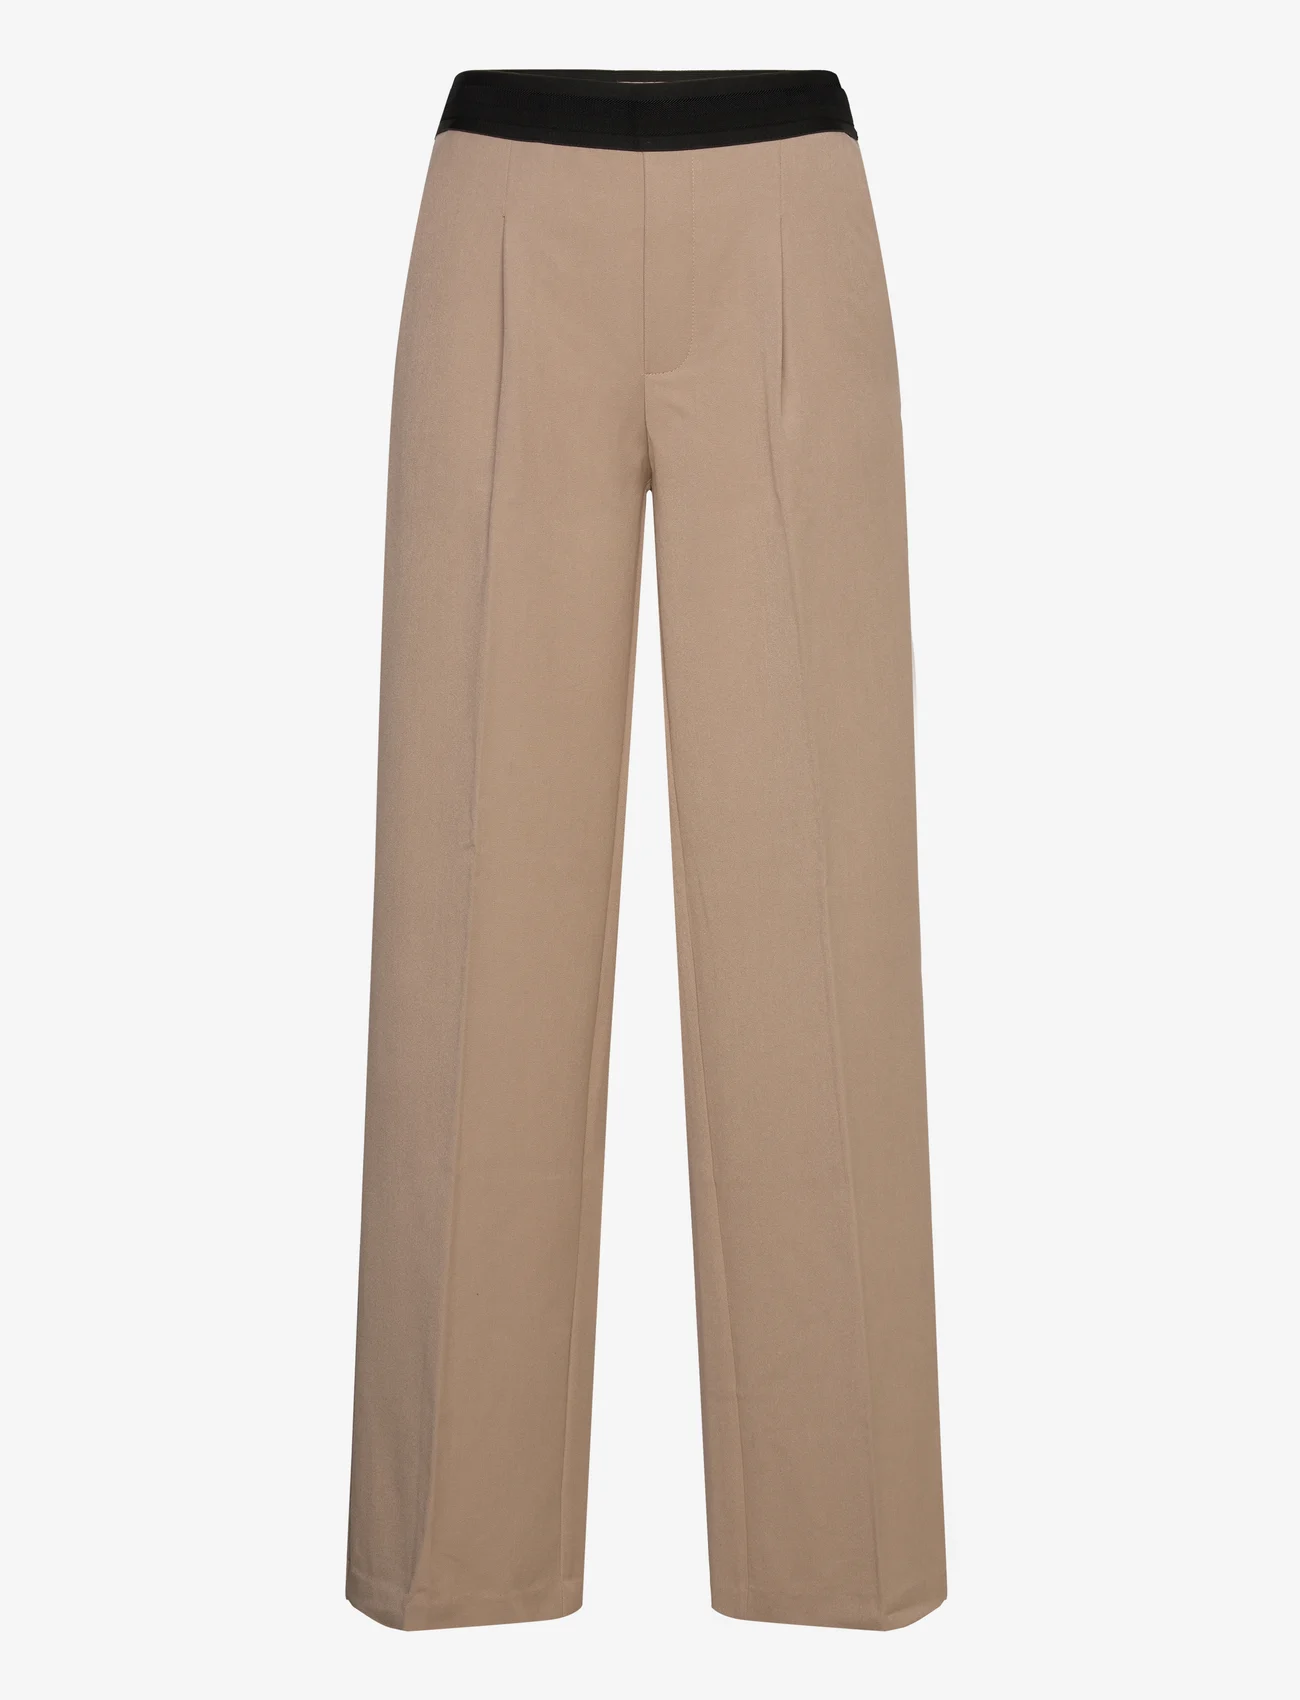 FREE/QUENT - FQKITTY-PANT - leveälahkeiset housut - simply taupe - 0